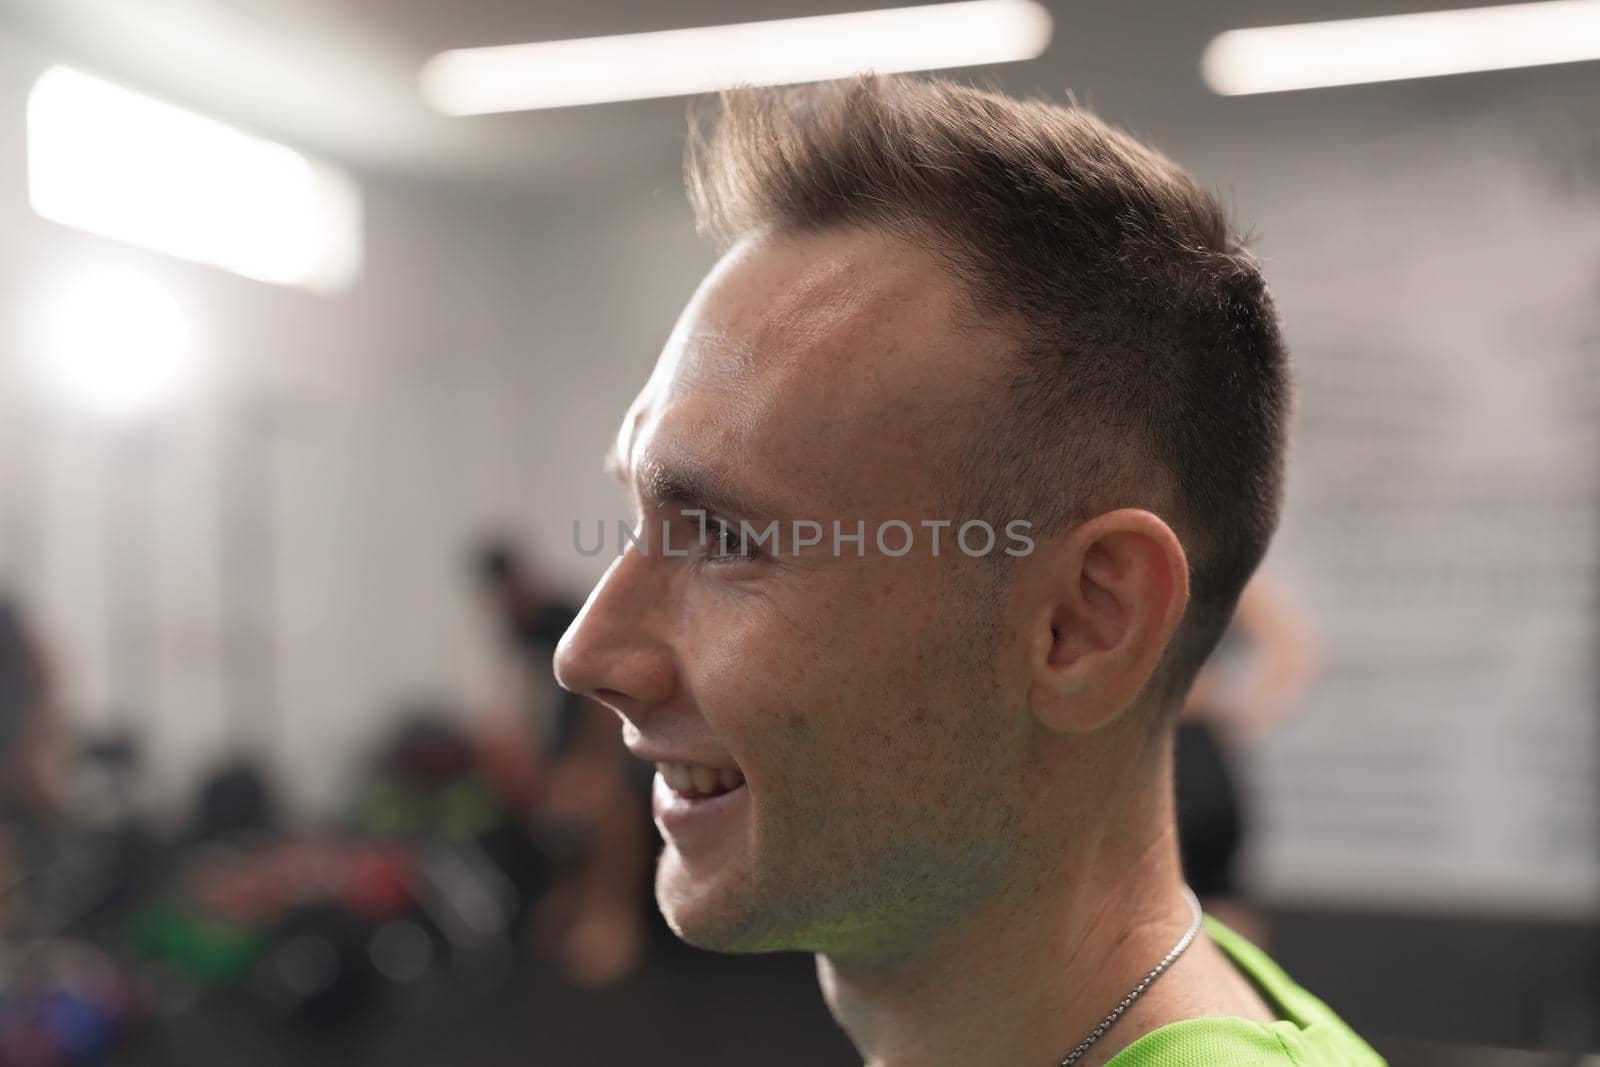 Man smiling during a training session at the local fitness center by stockrojoverdeyazul